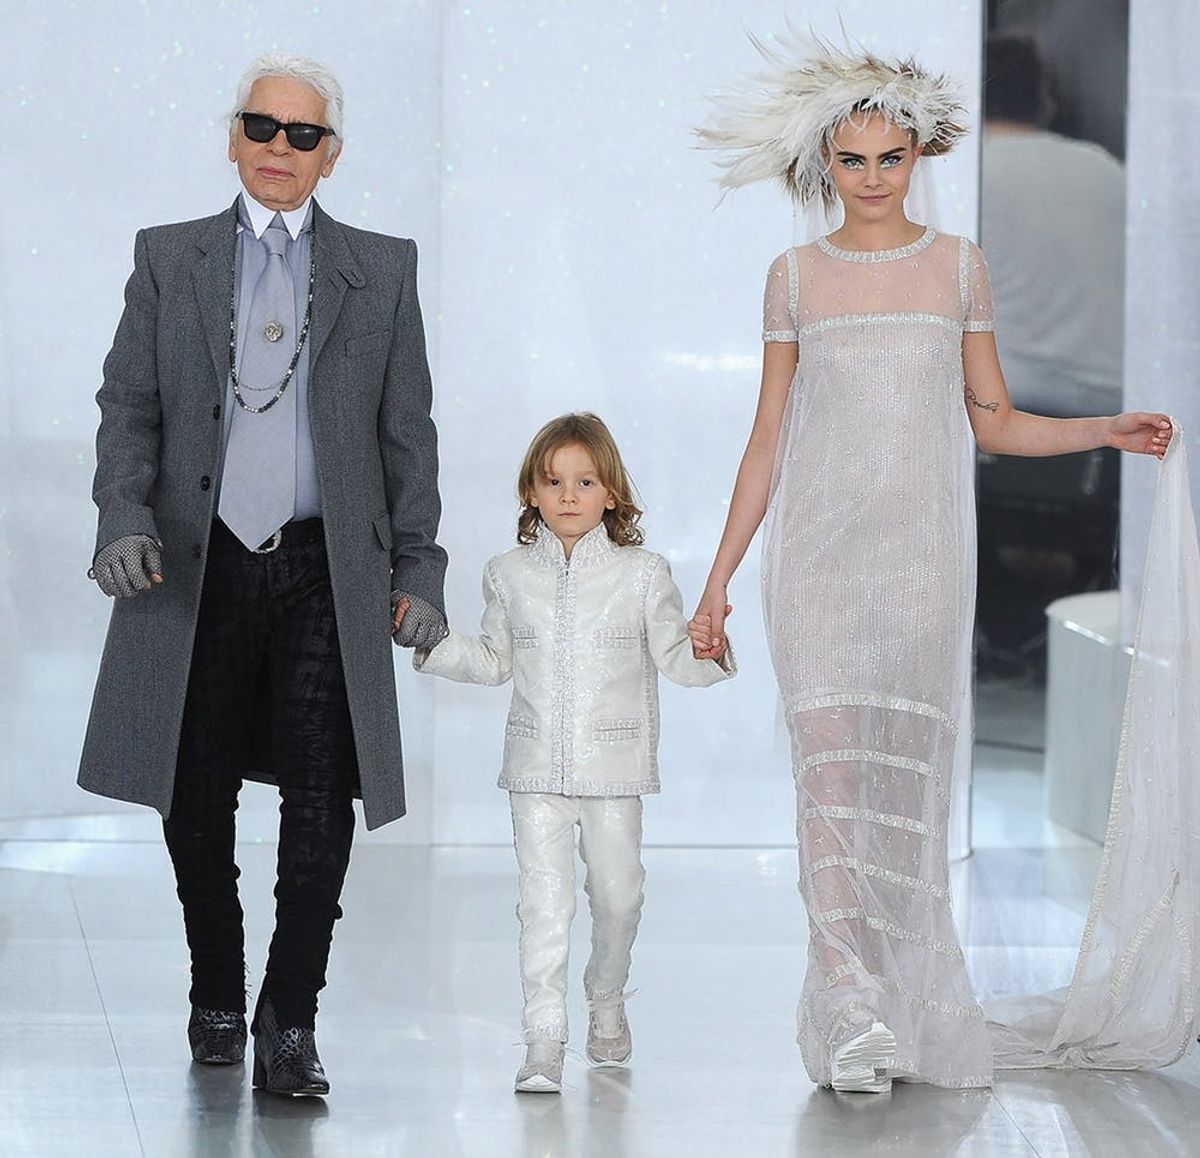 Here’s How Karl Lagerfeld Wants to Dress Your Kids - Brit + Co